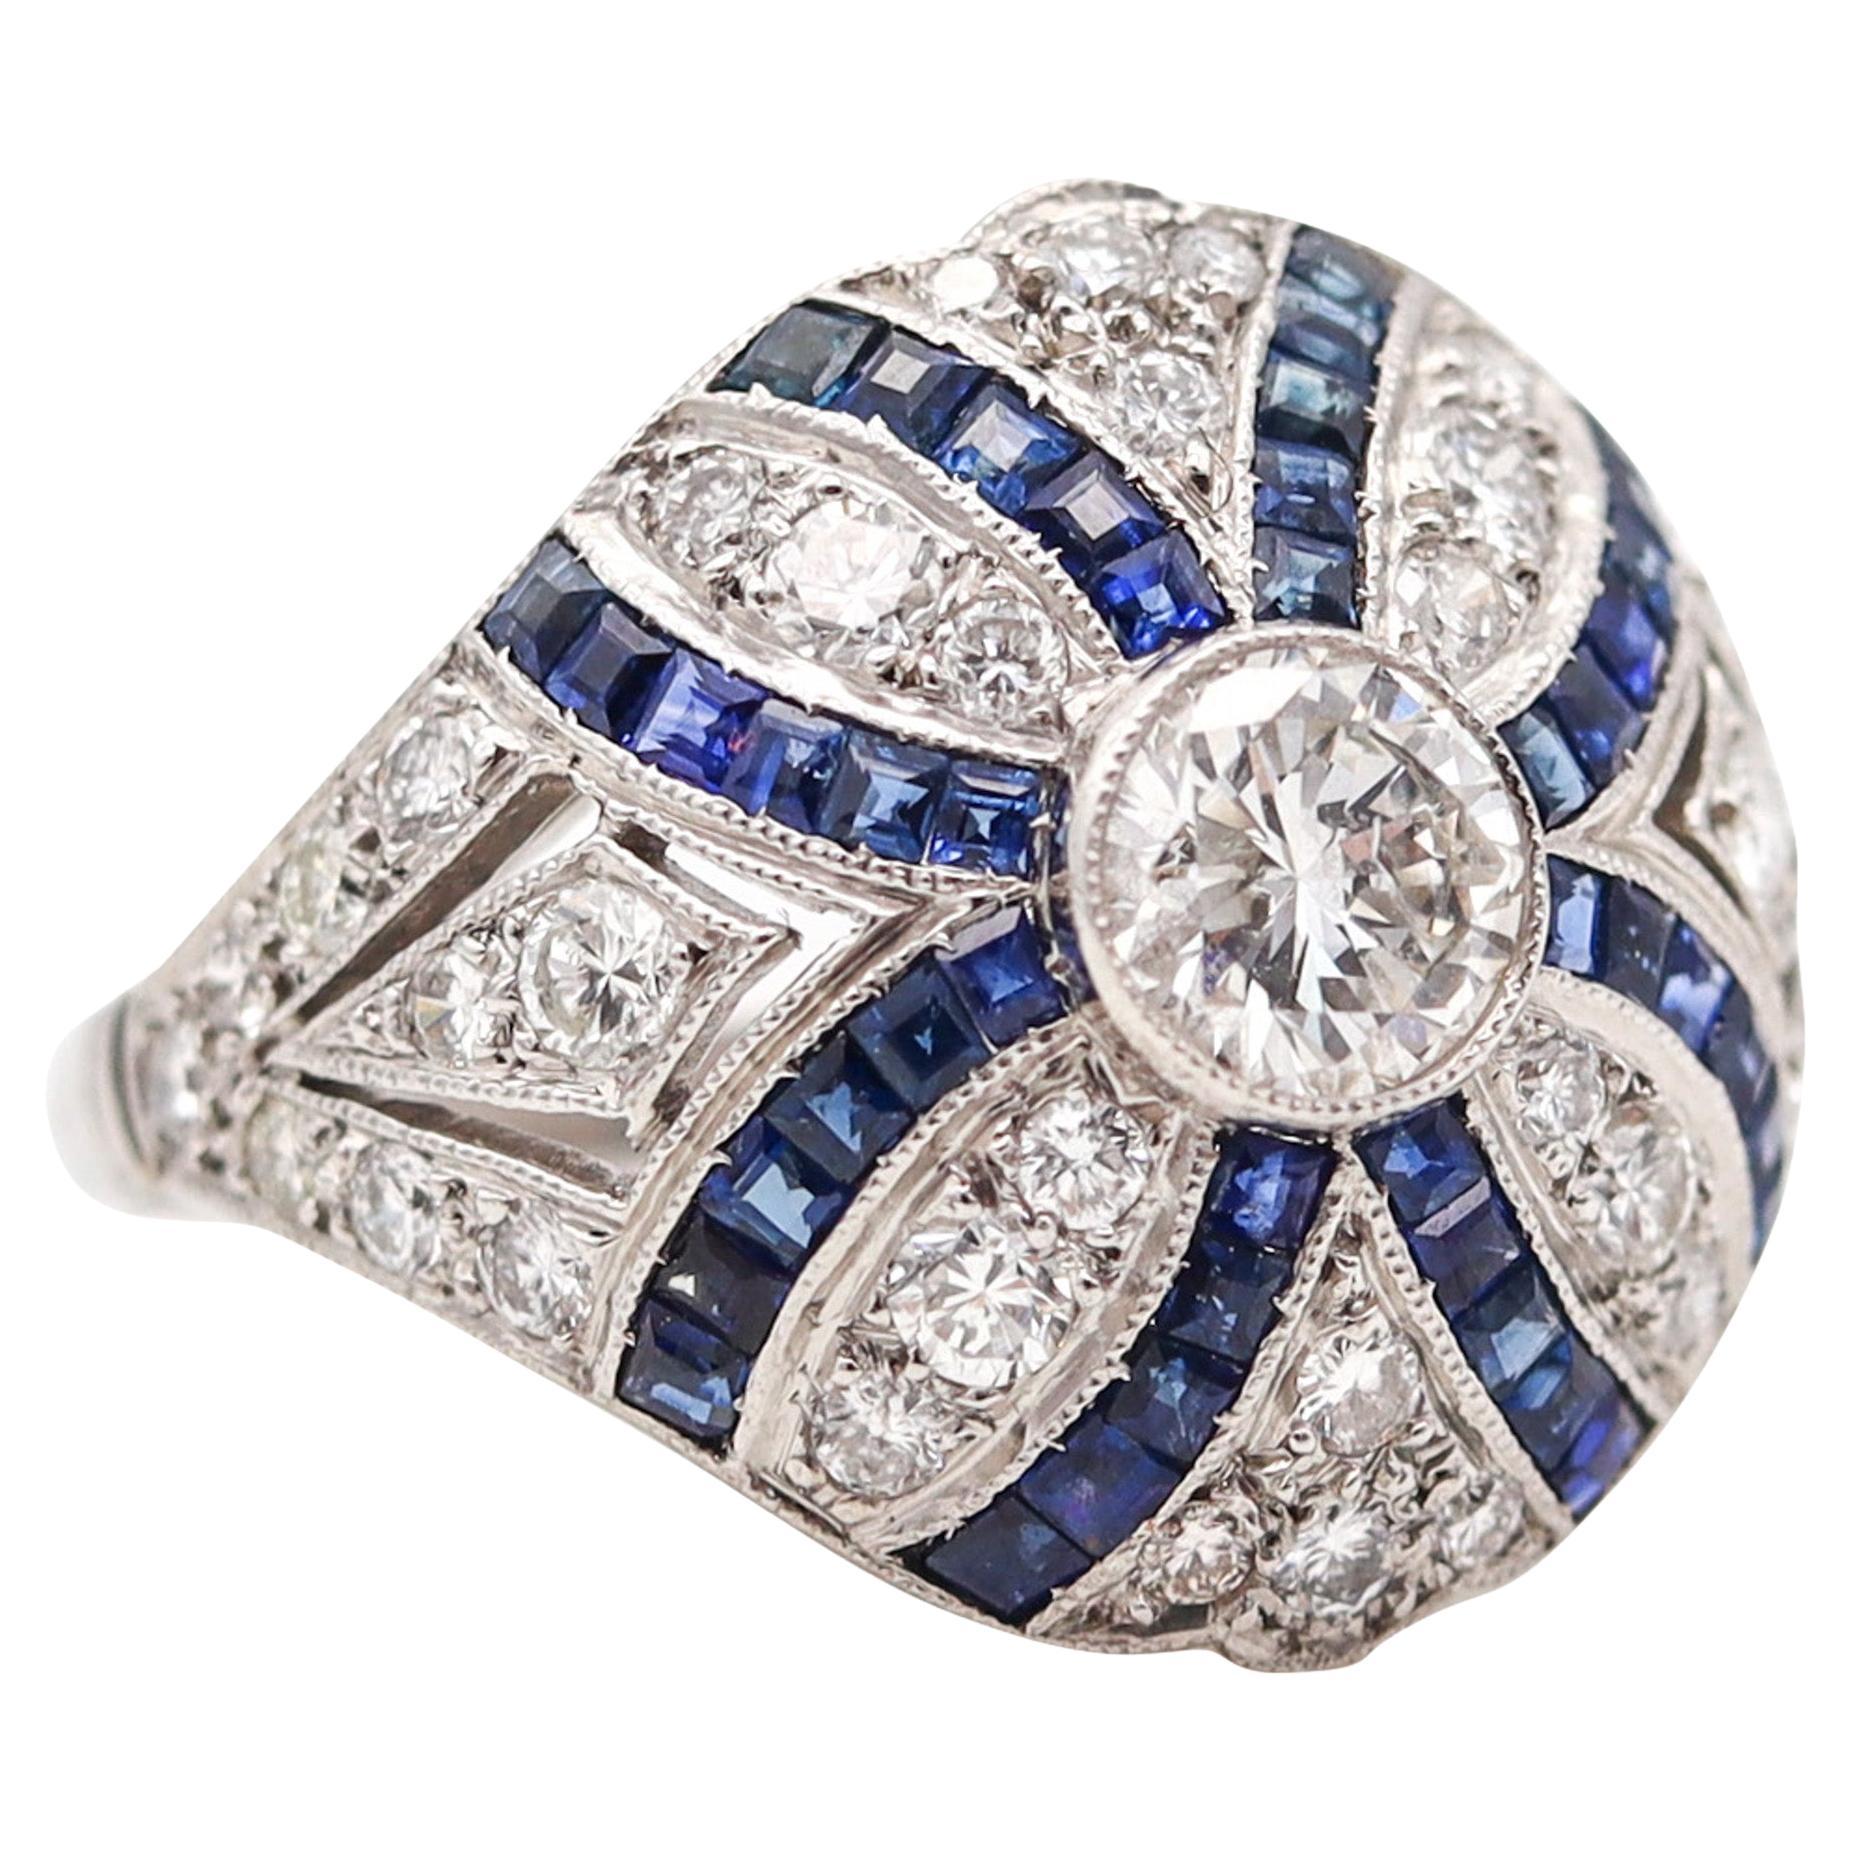 Art Deco 1930 Bombe Ring In Platinum With 3.04 Ctw In Diamonds And Sapphires For Sale